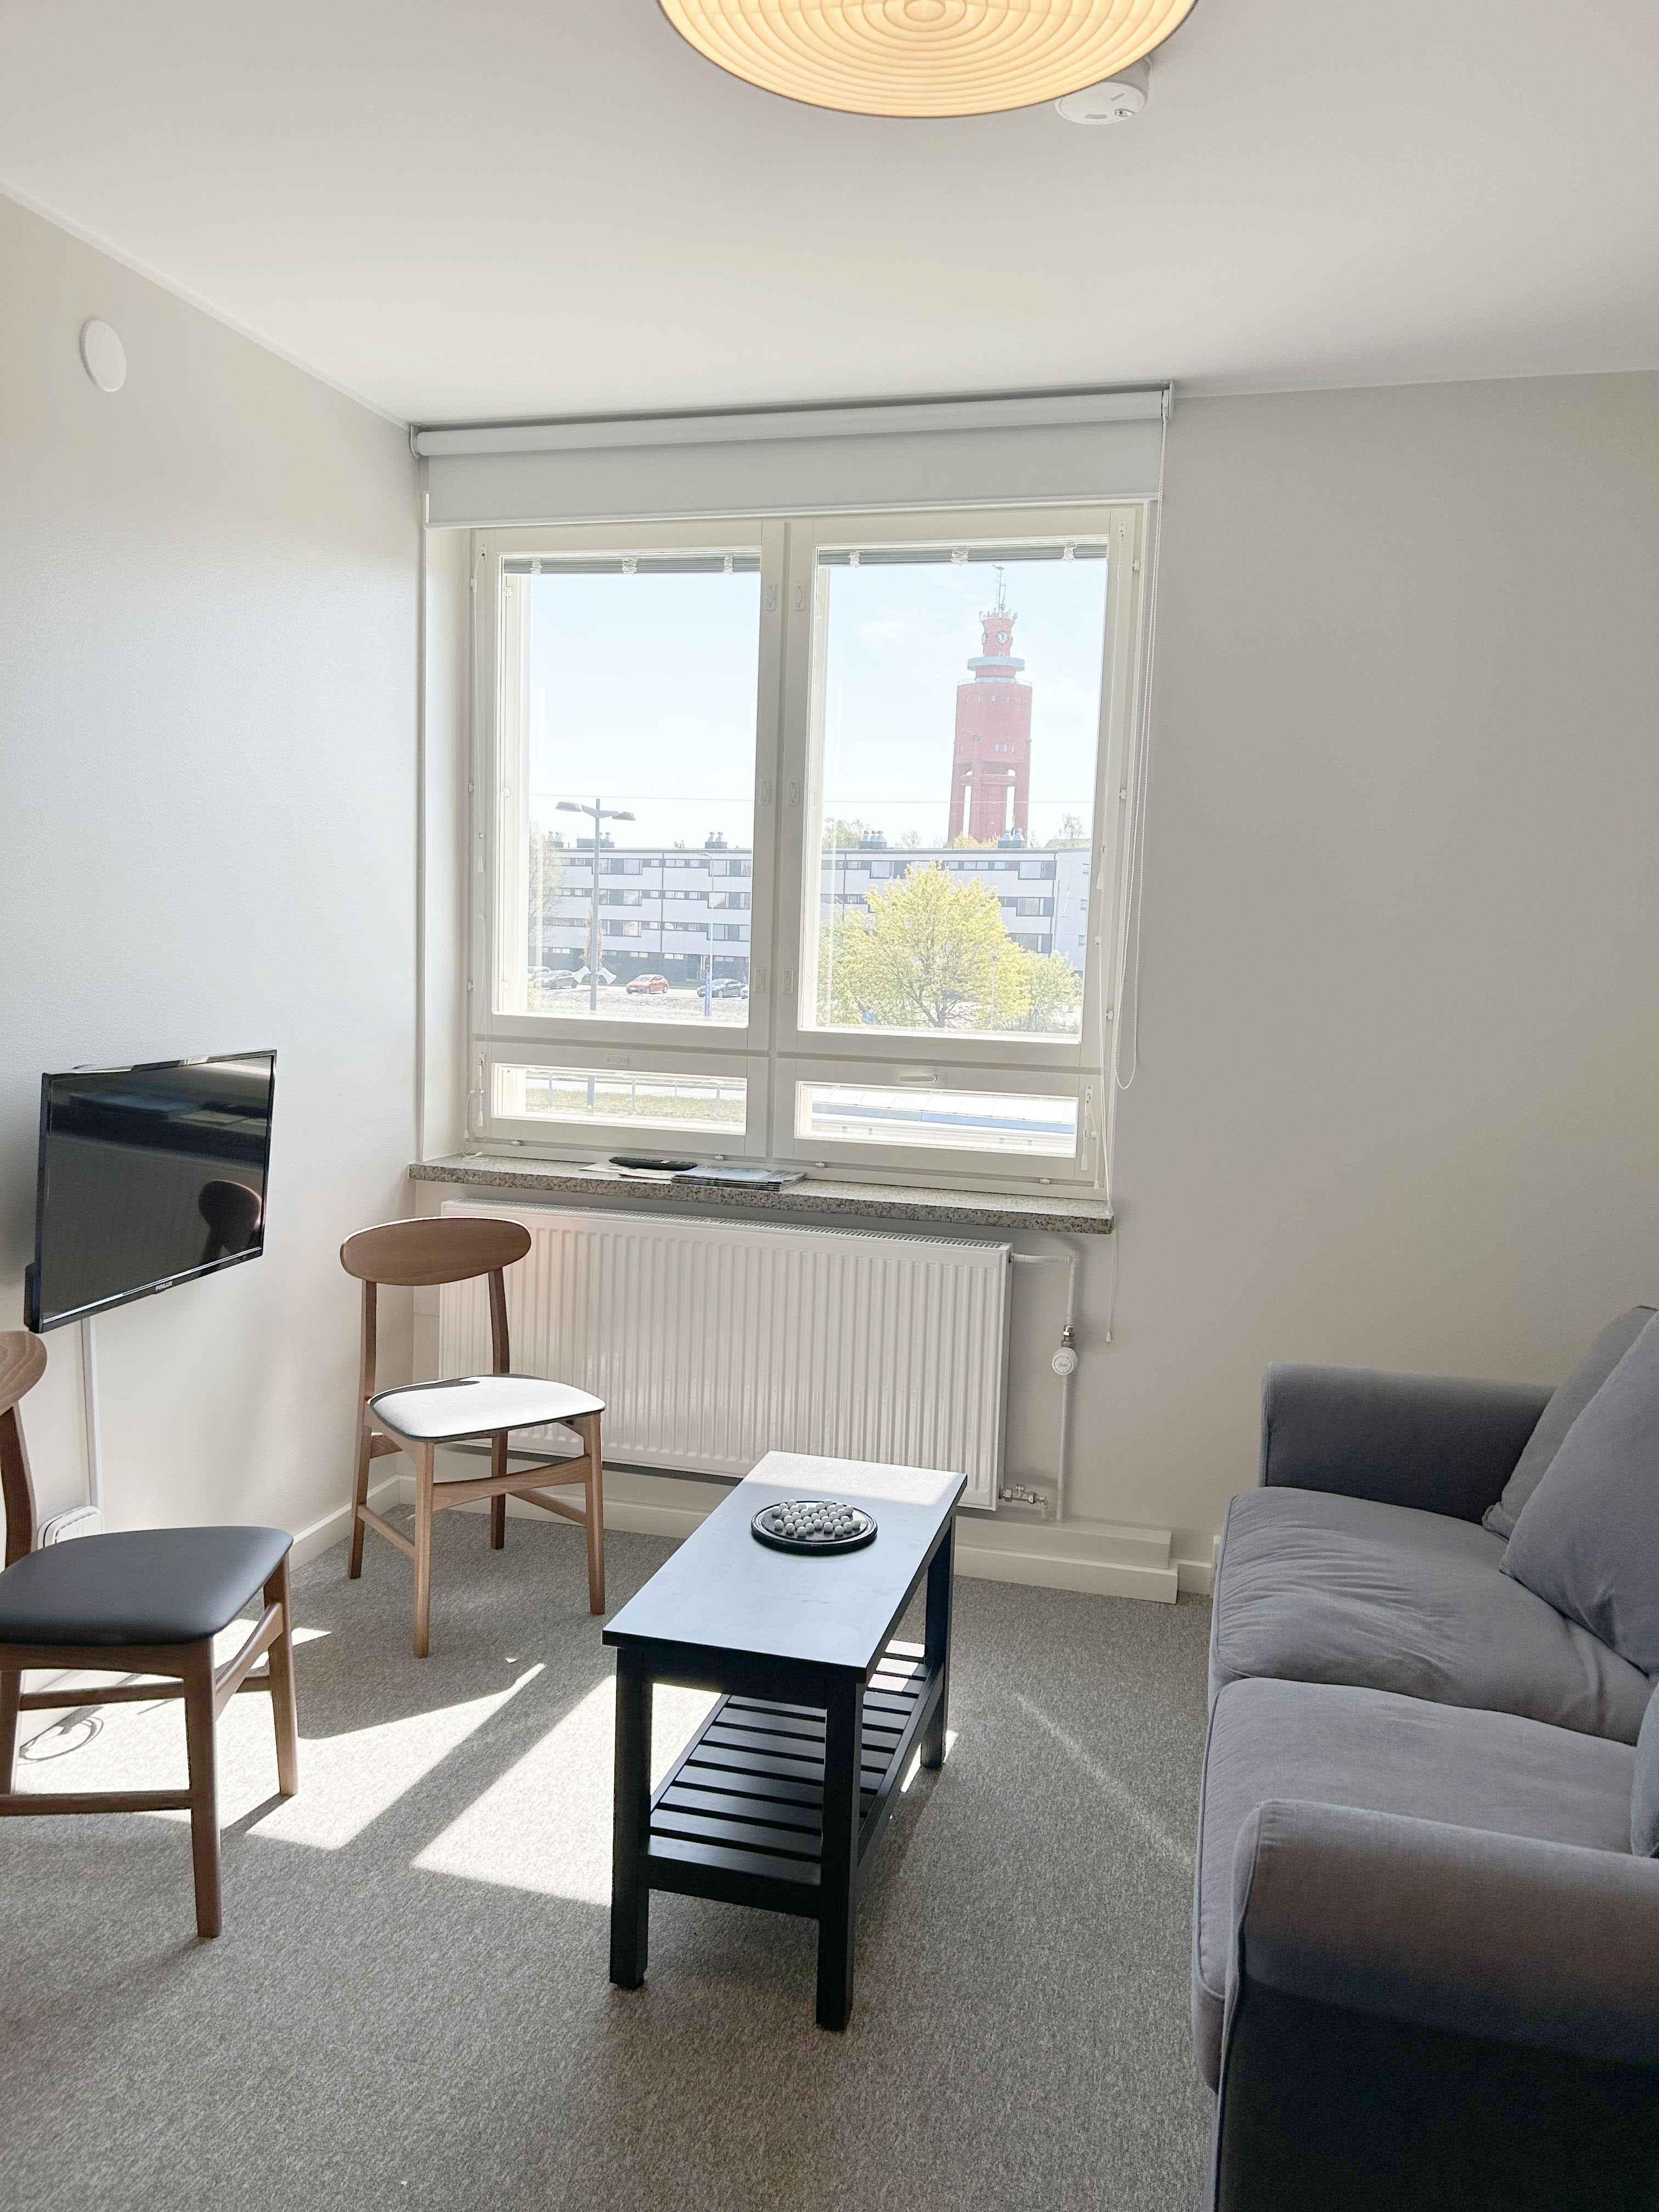 Finnish cities are starting to require permits for “professional” Airbnb hosts